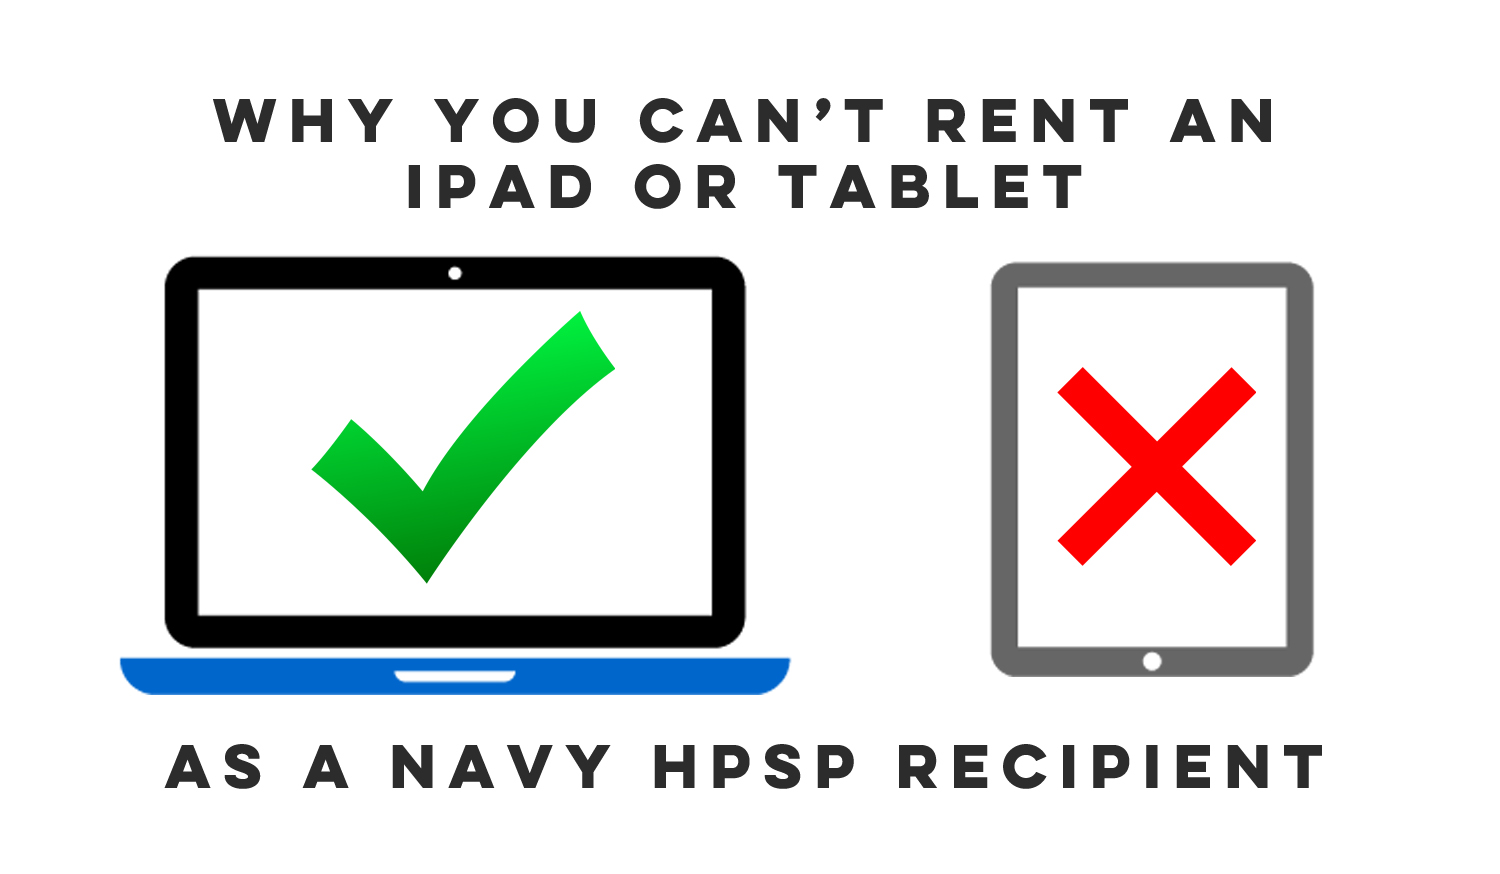 Navy Will Not Reimburse for iPads or Tablets